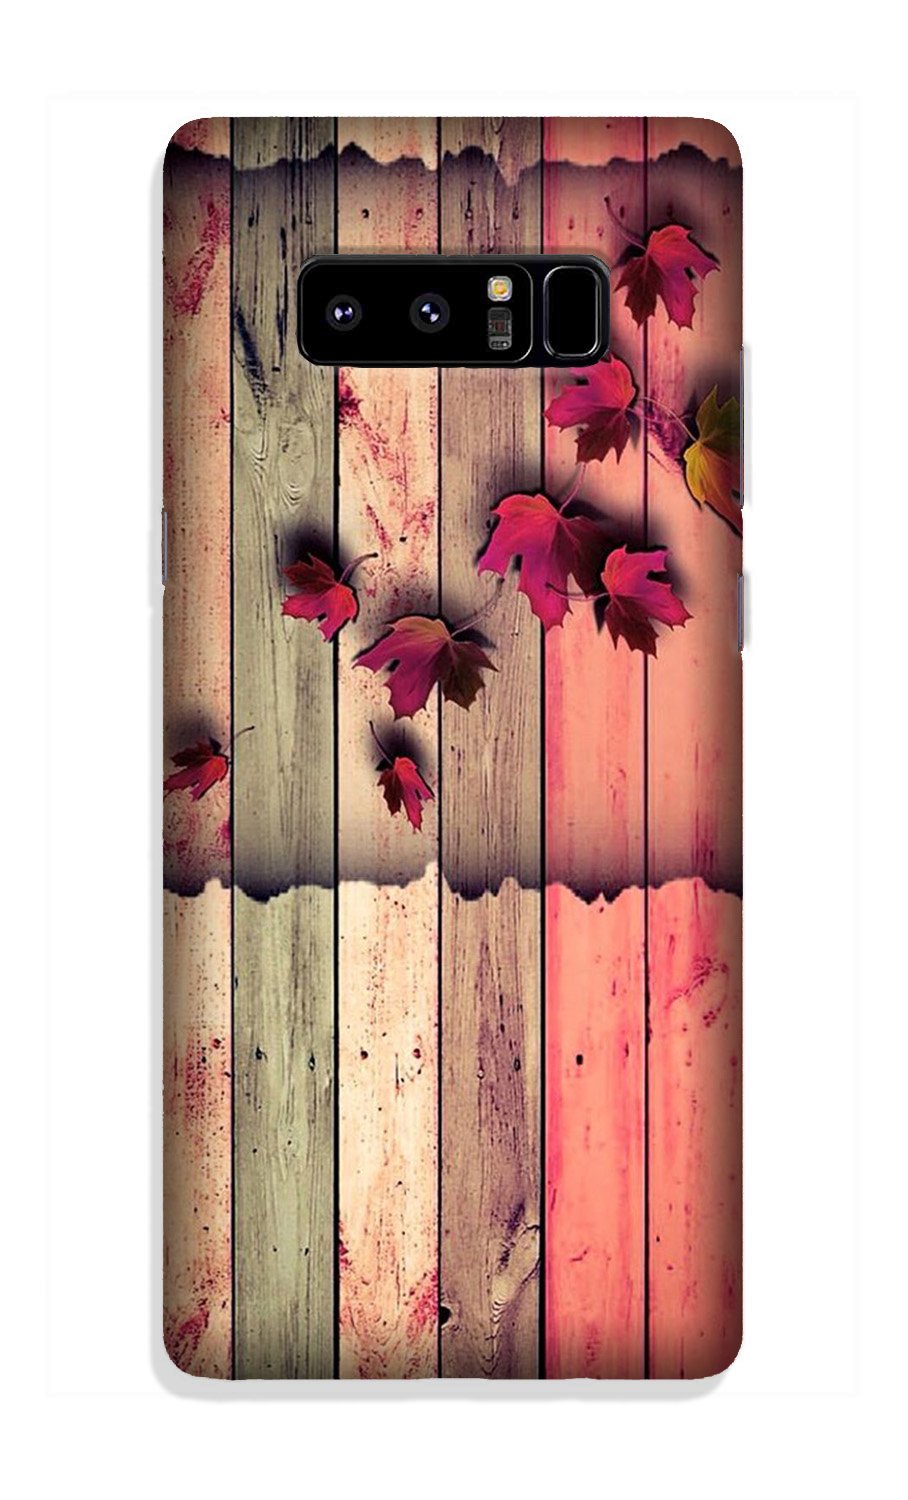 Wooden look2 Case for Galaxy Note 8